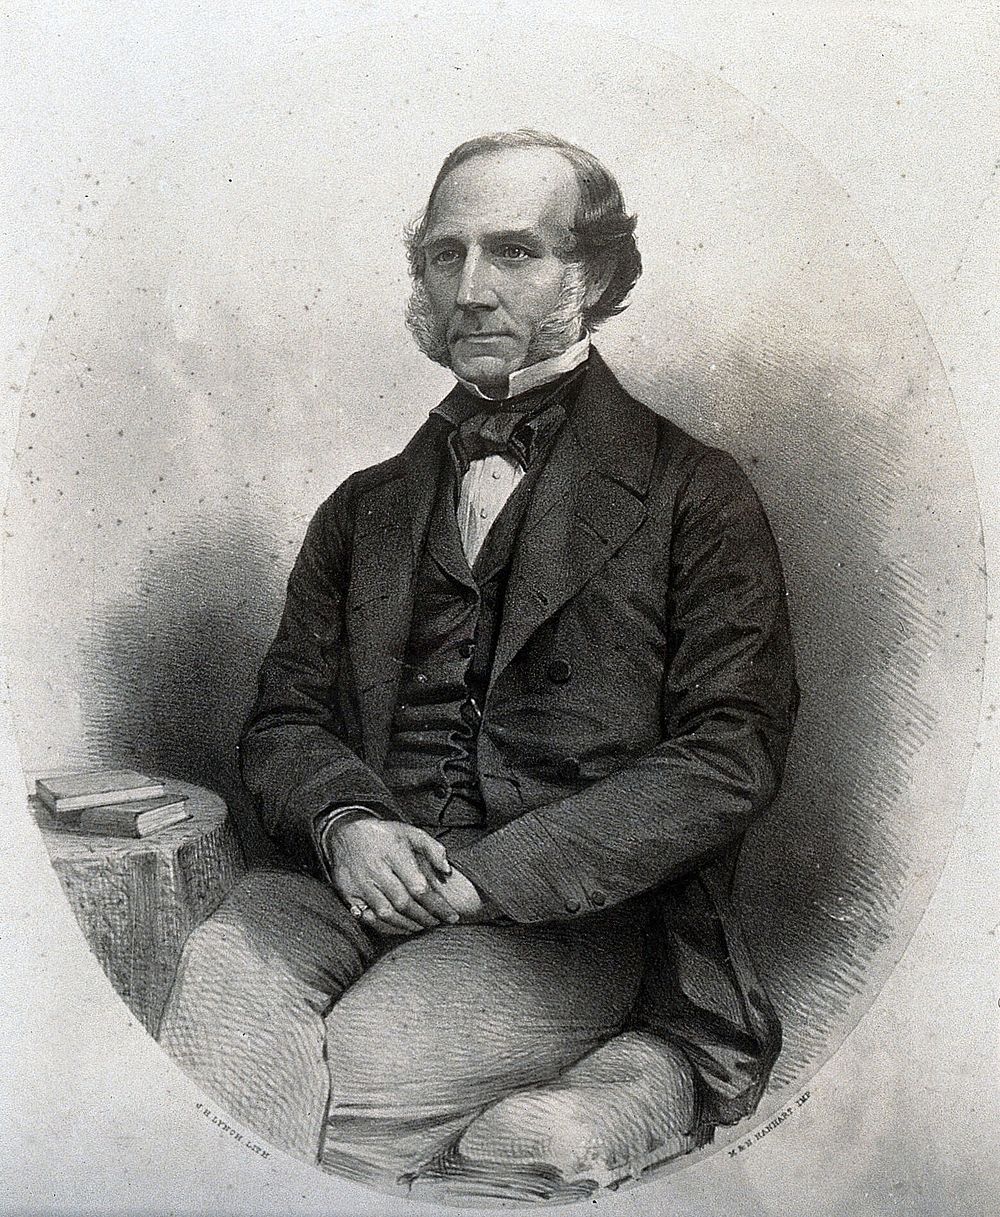 James Adair Laurie. Photograph after a lithograph by J.H. Lynch.